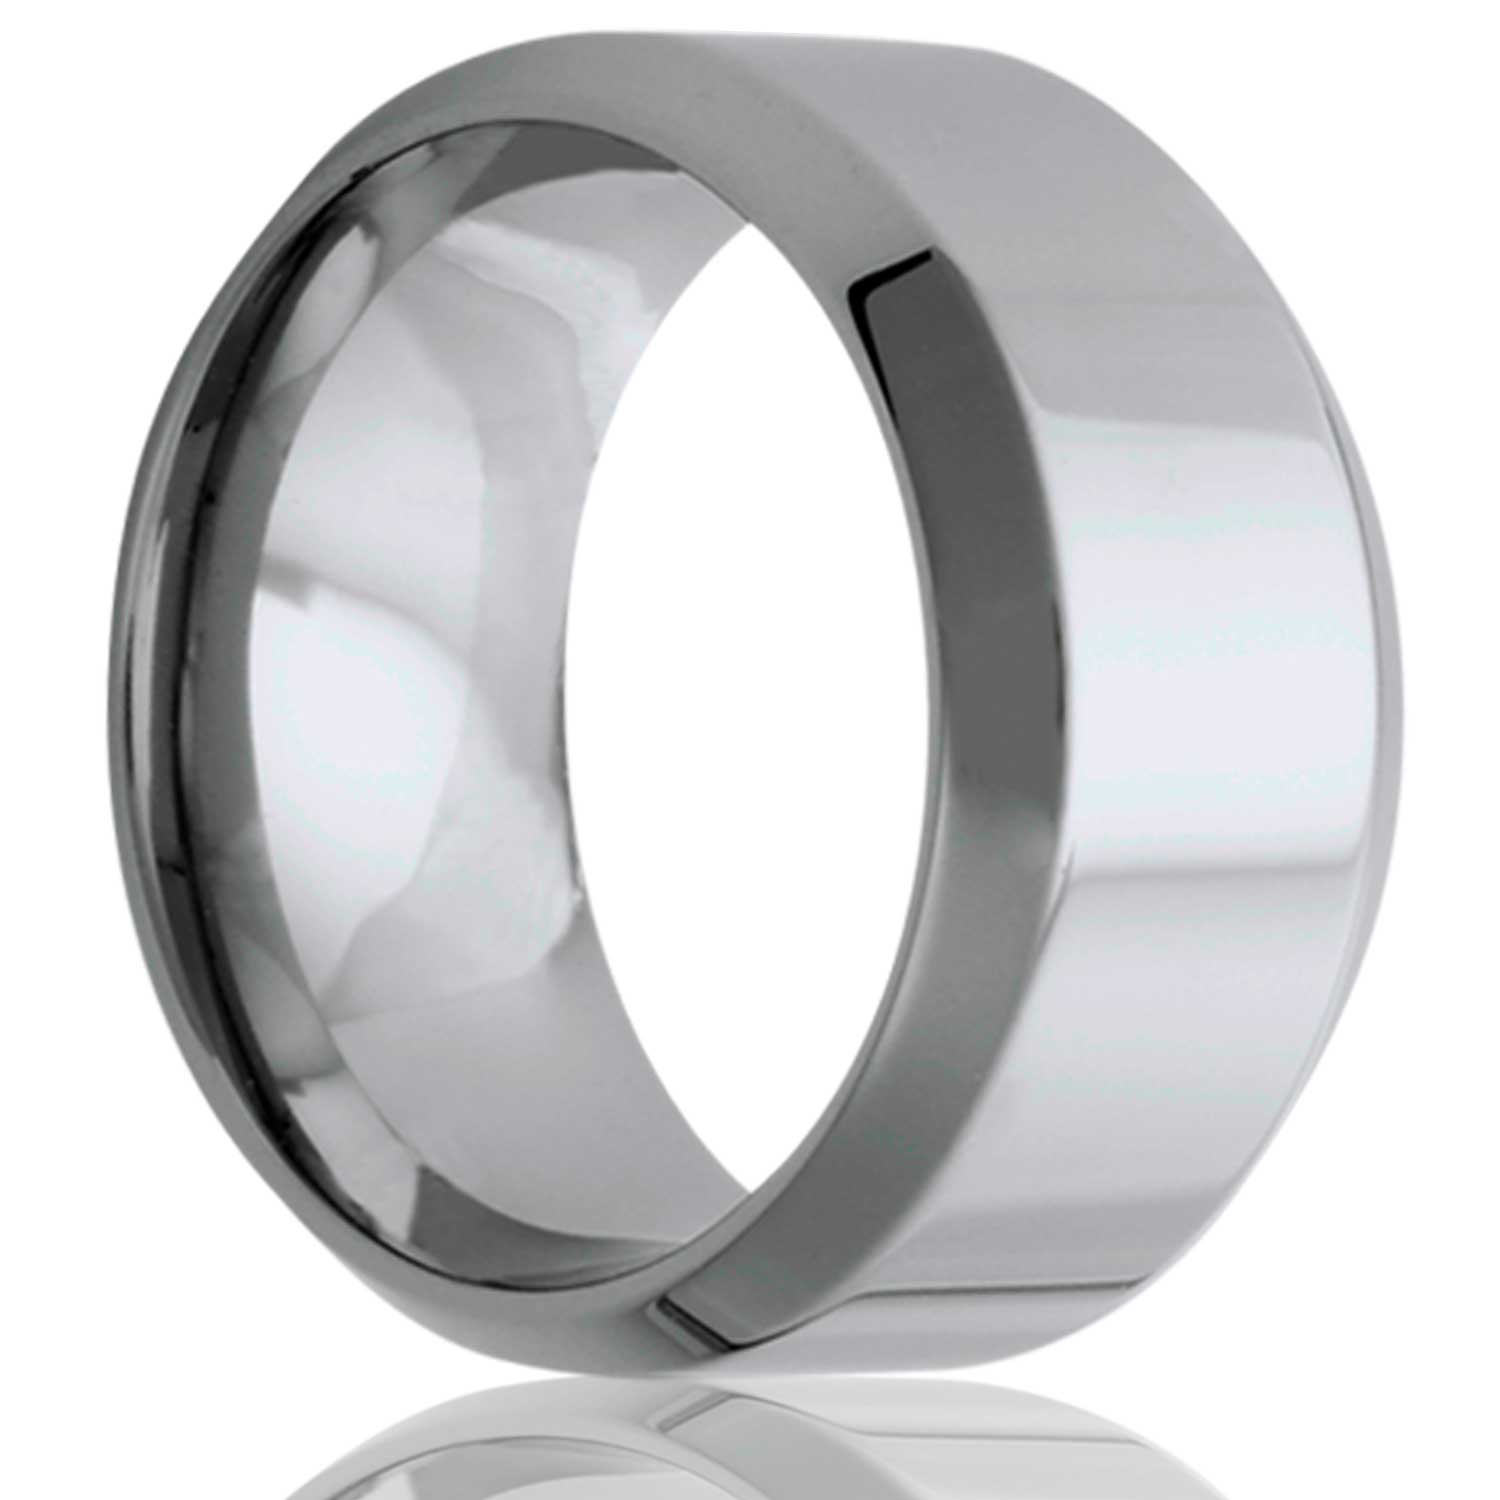 A polished tungsten wedding band with beveled edges displayed on a neutral white background.